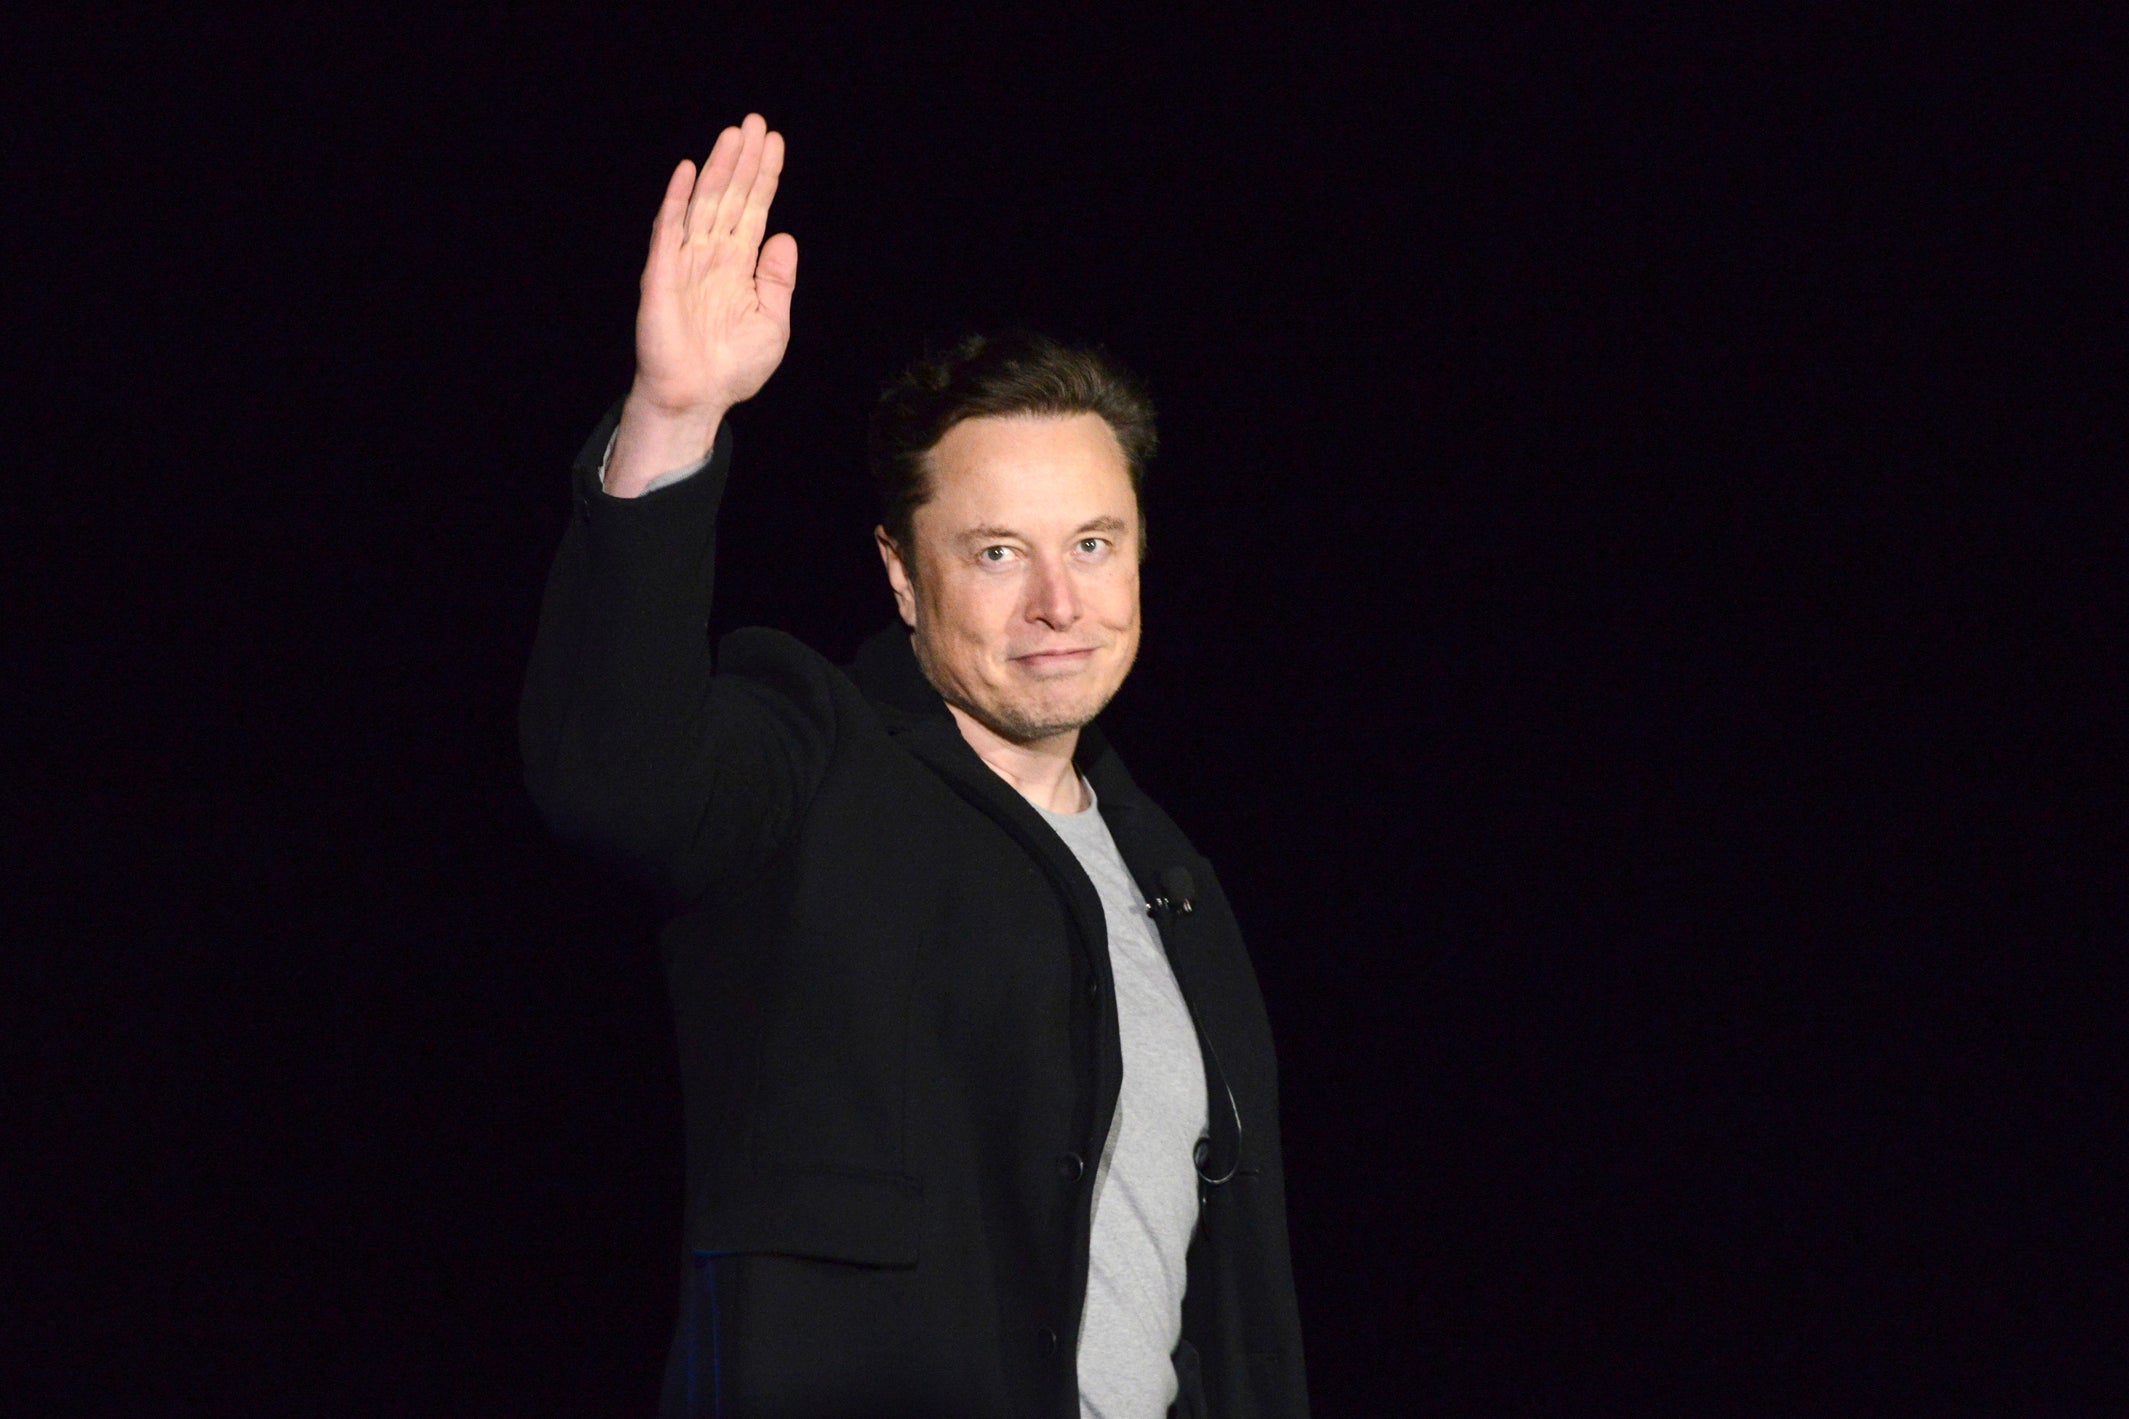 Elon Musk took over Twitter in October 2022 in a deal worth $44 billion